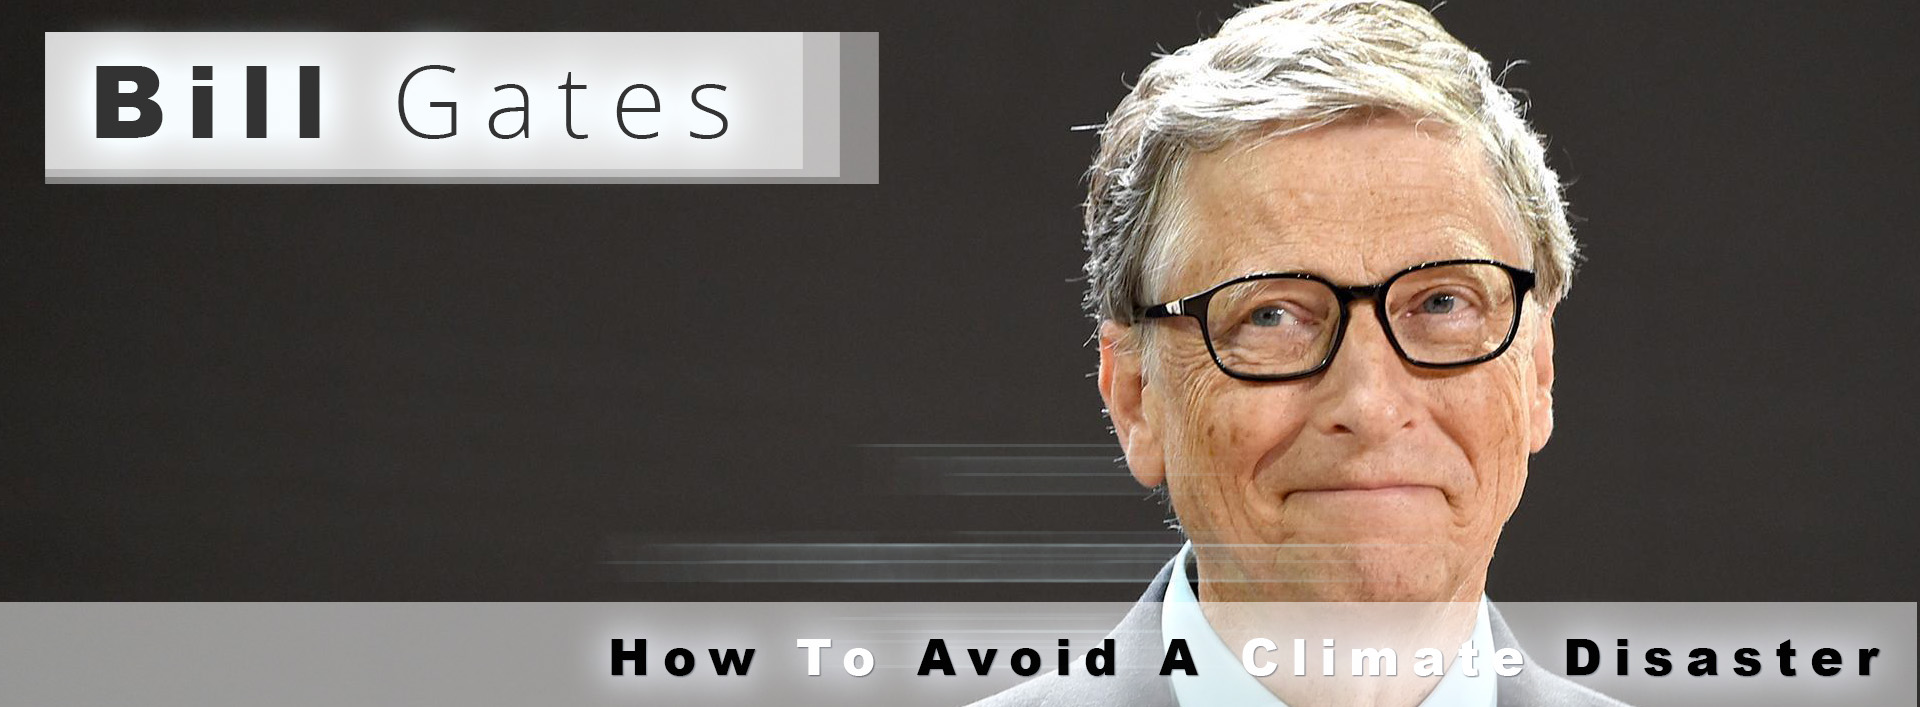 Bill-Gates--How-To-Avoid-A-Climate-Disaster